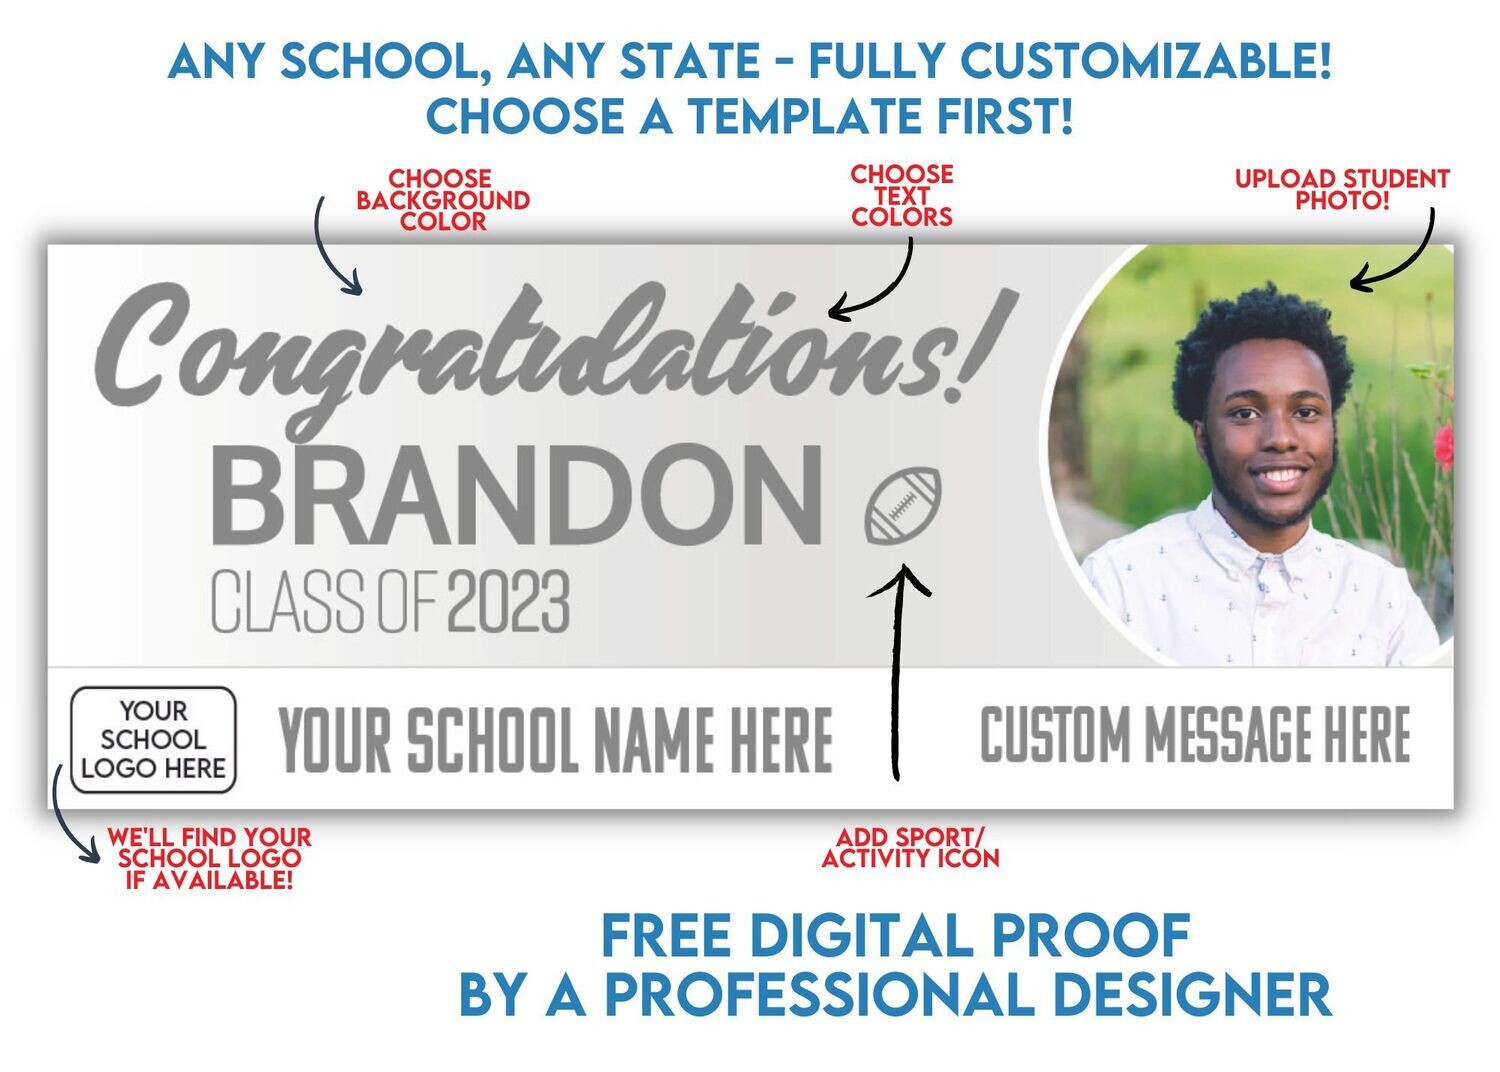 Any School, Any State - Customizable Graduation Banners